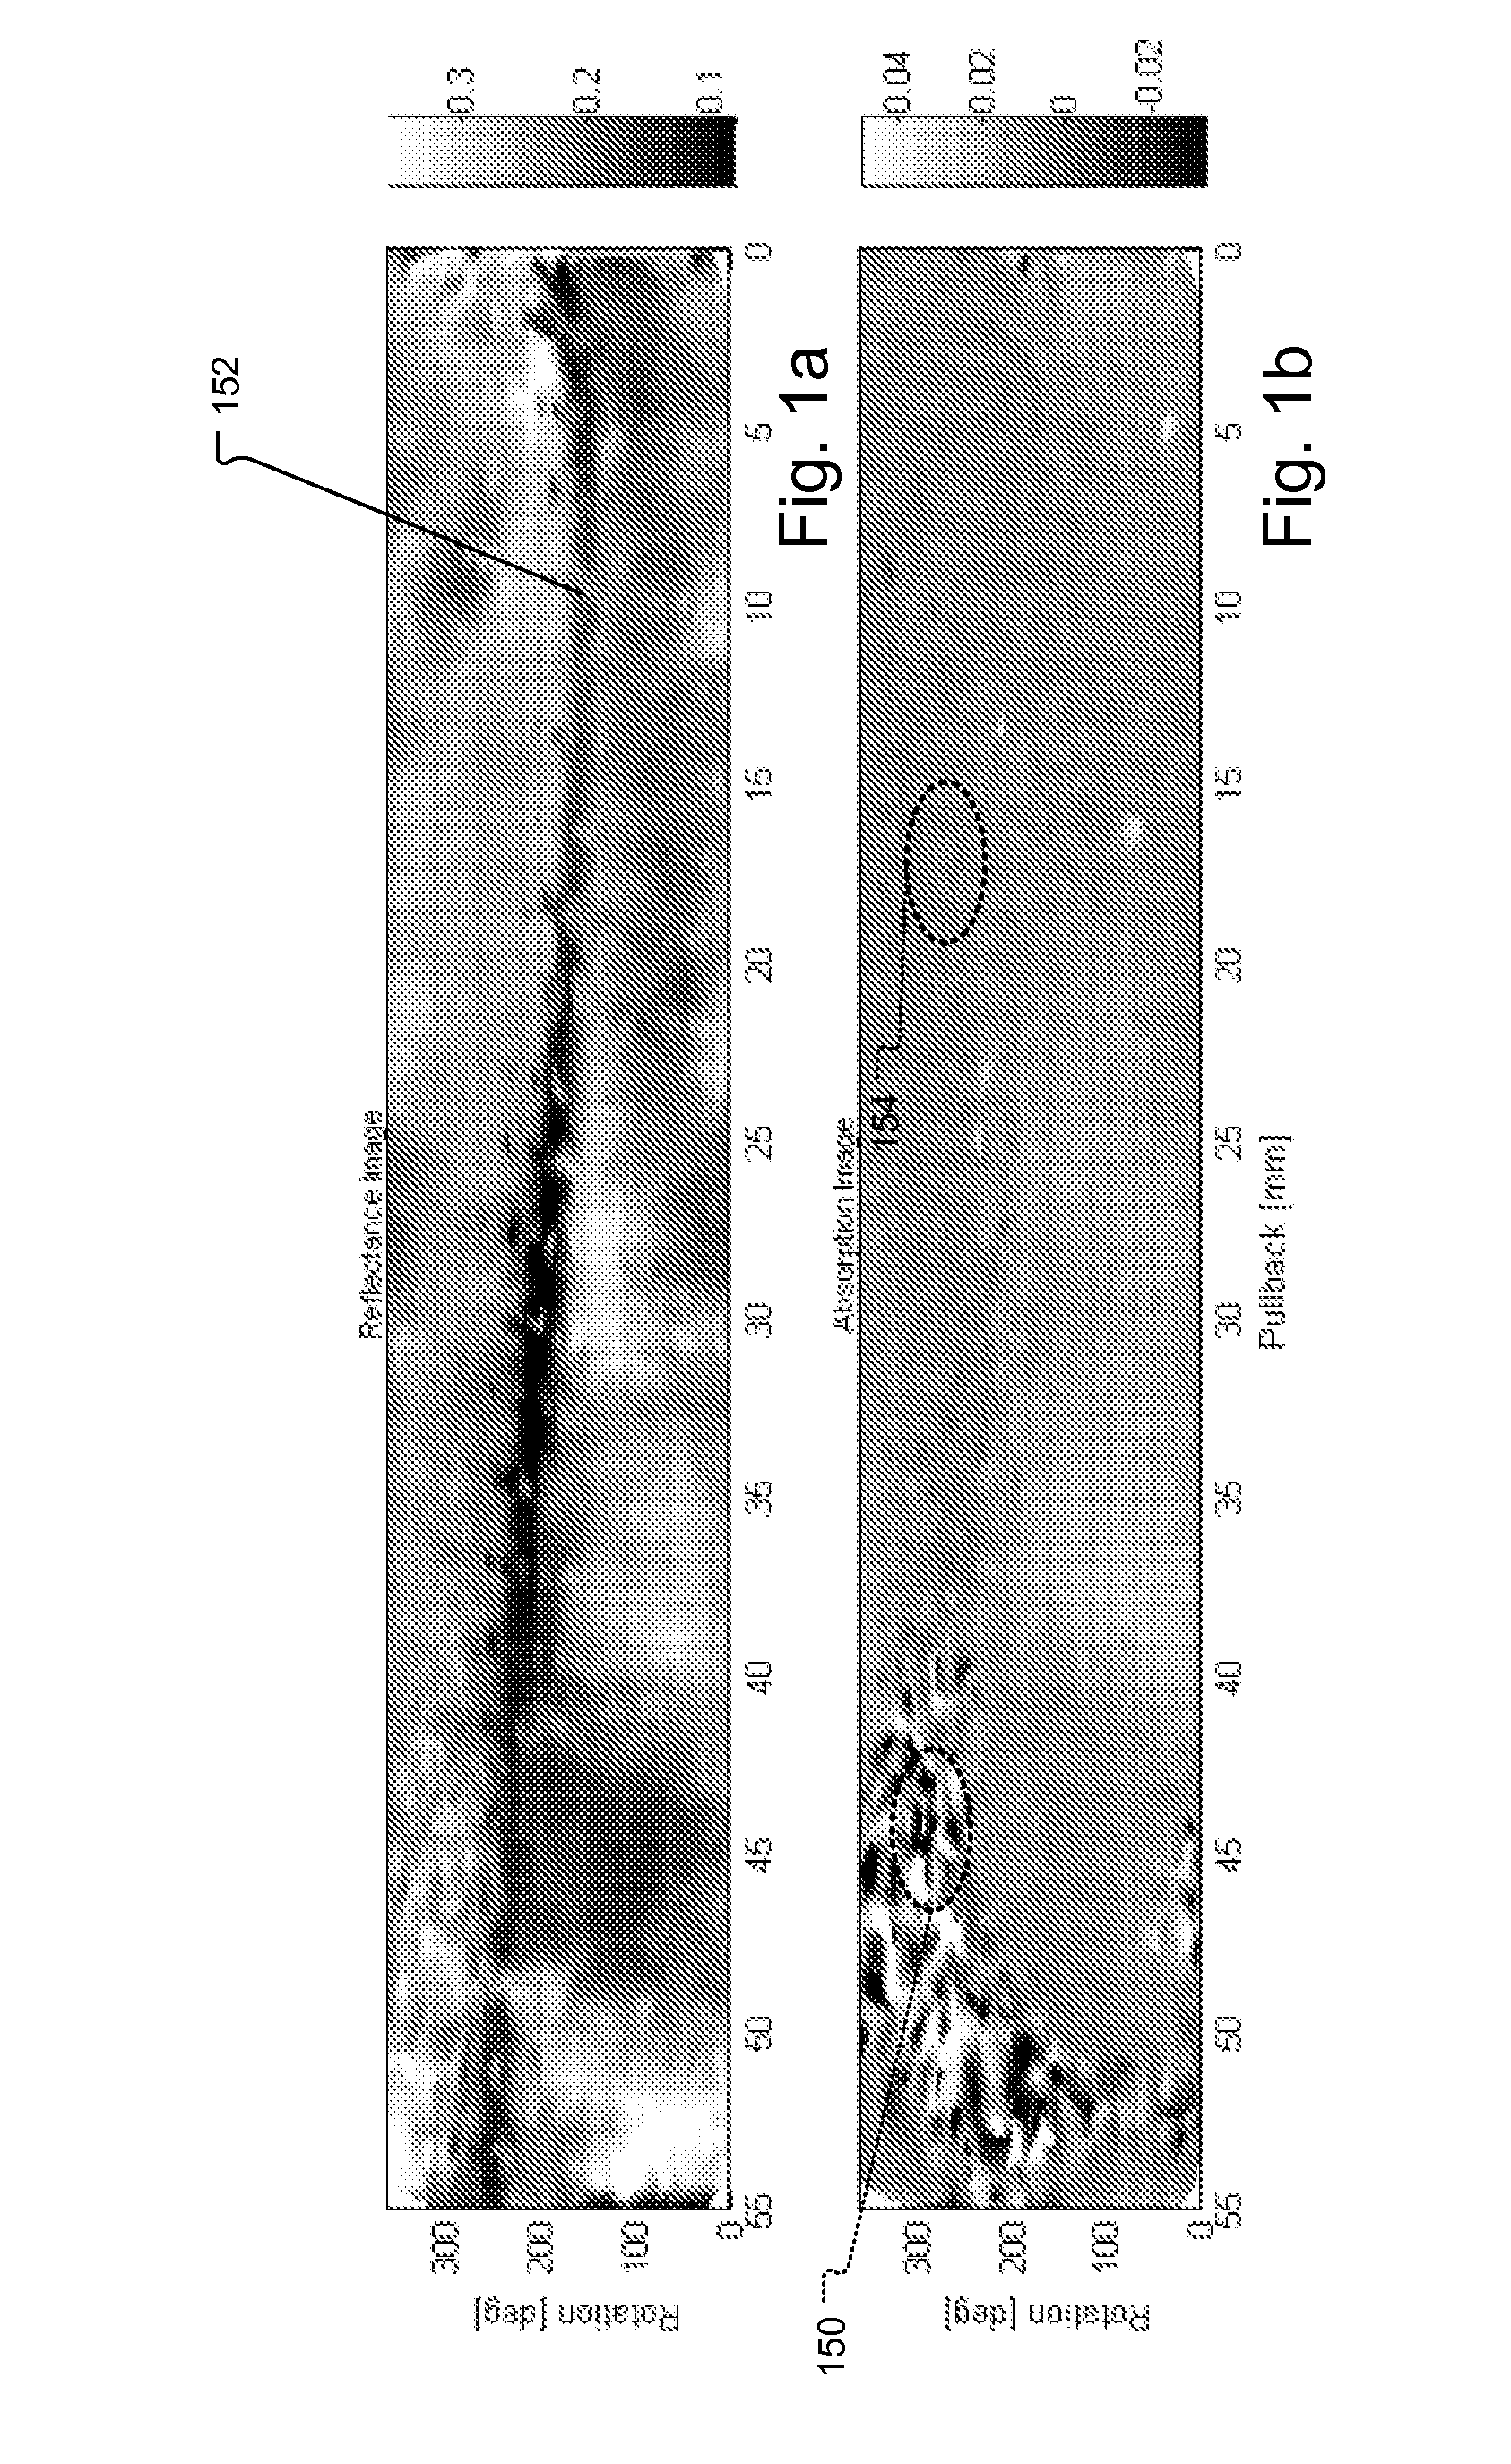 Method and System for Intra Luminal Thrombus Detection